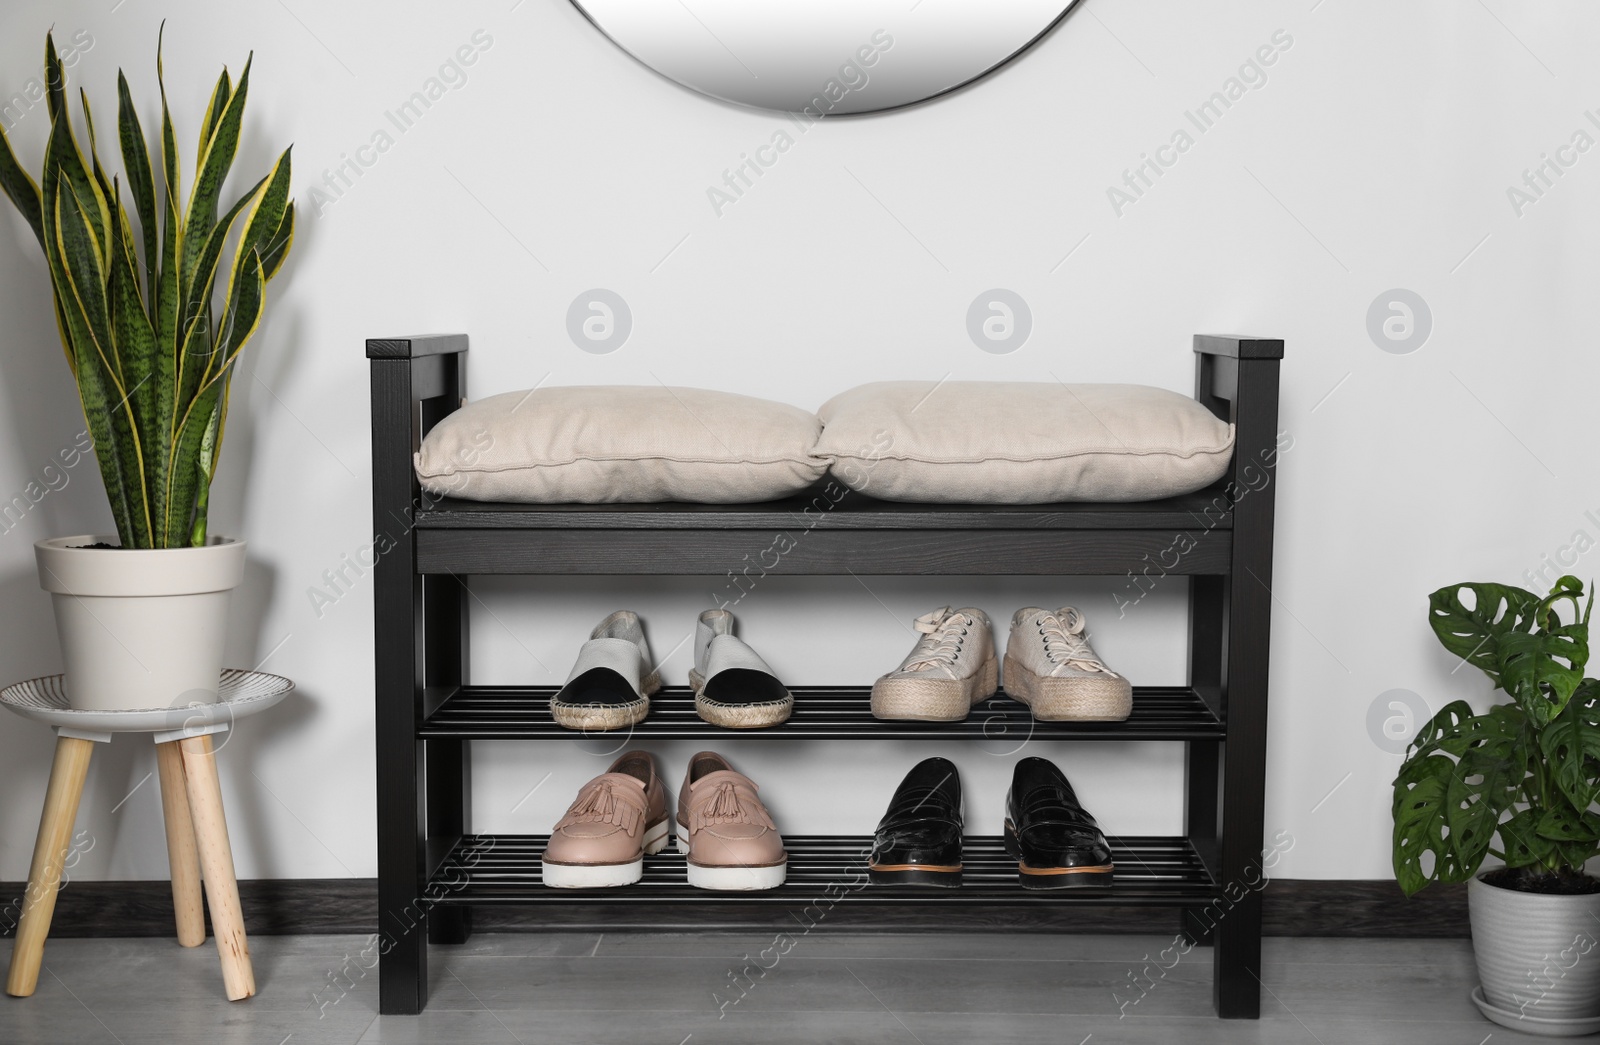 Photo of Shoe storage bench and houseplants in hallway